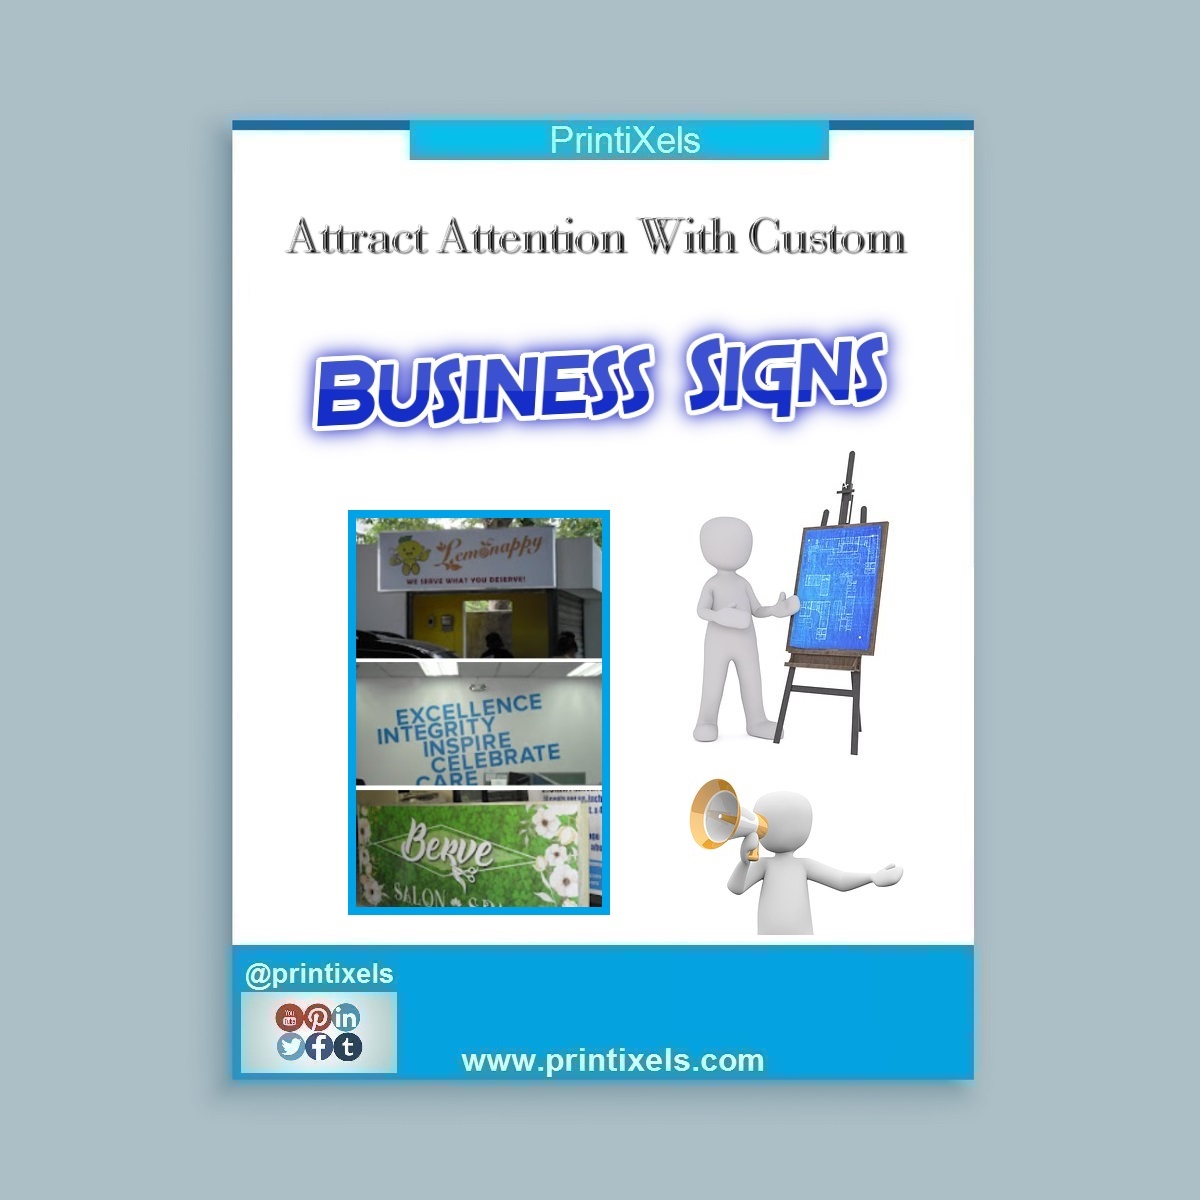 Attract Attention With Custom Business Signs